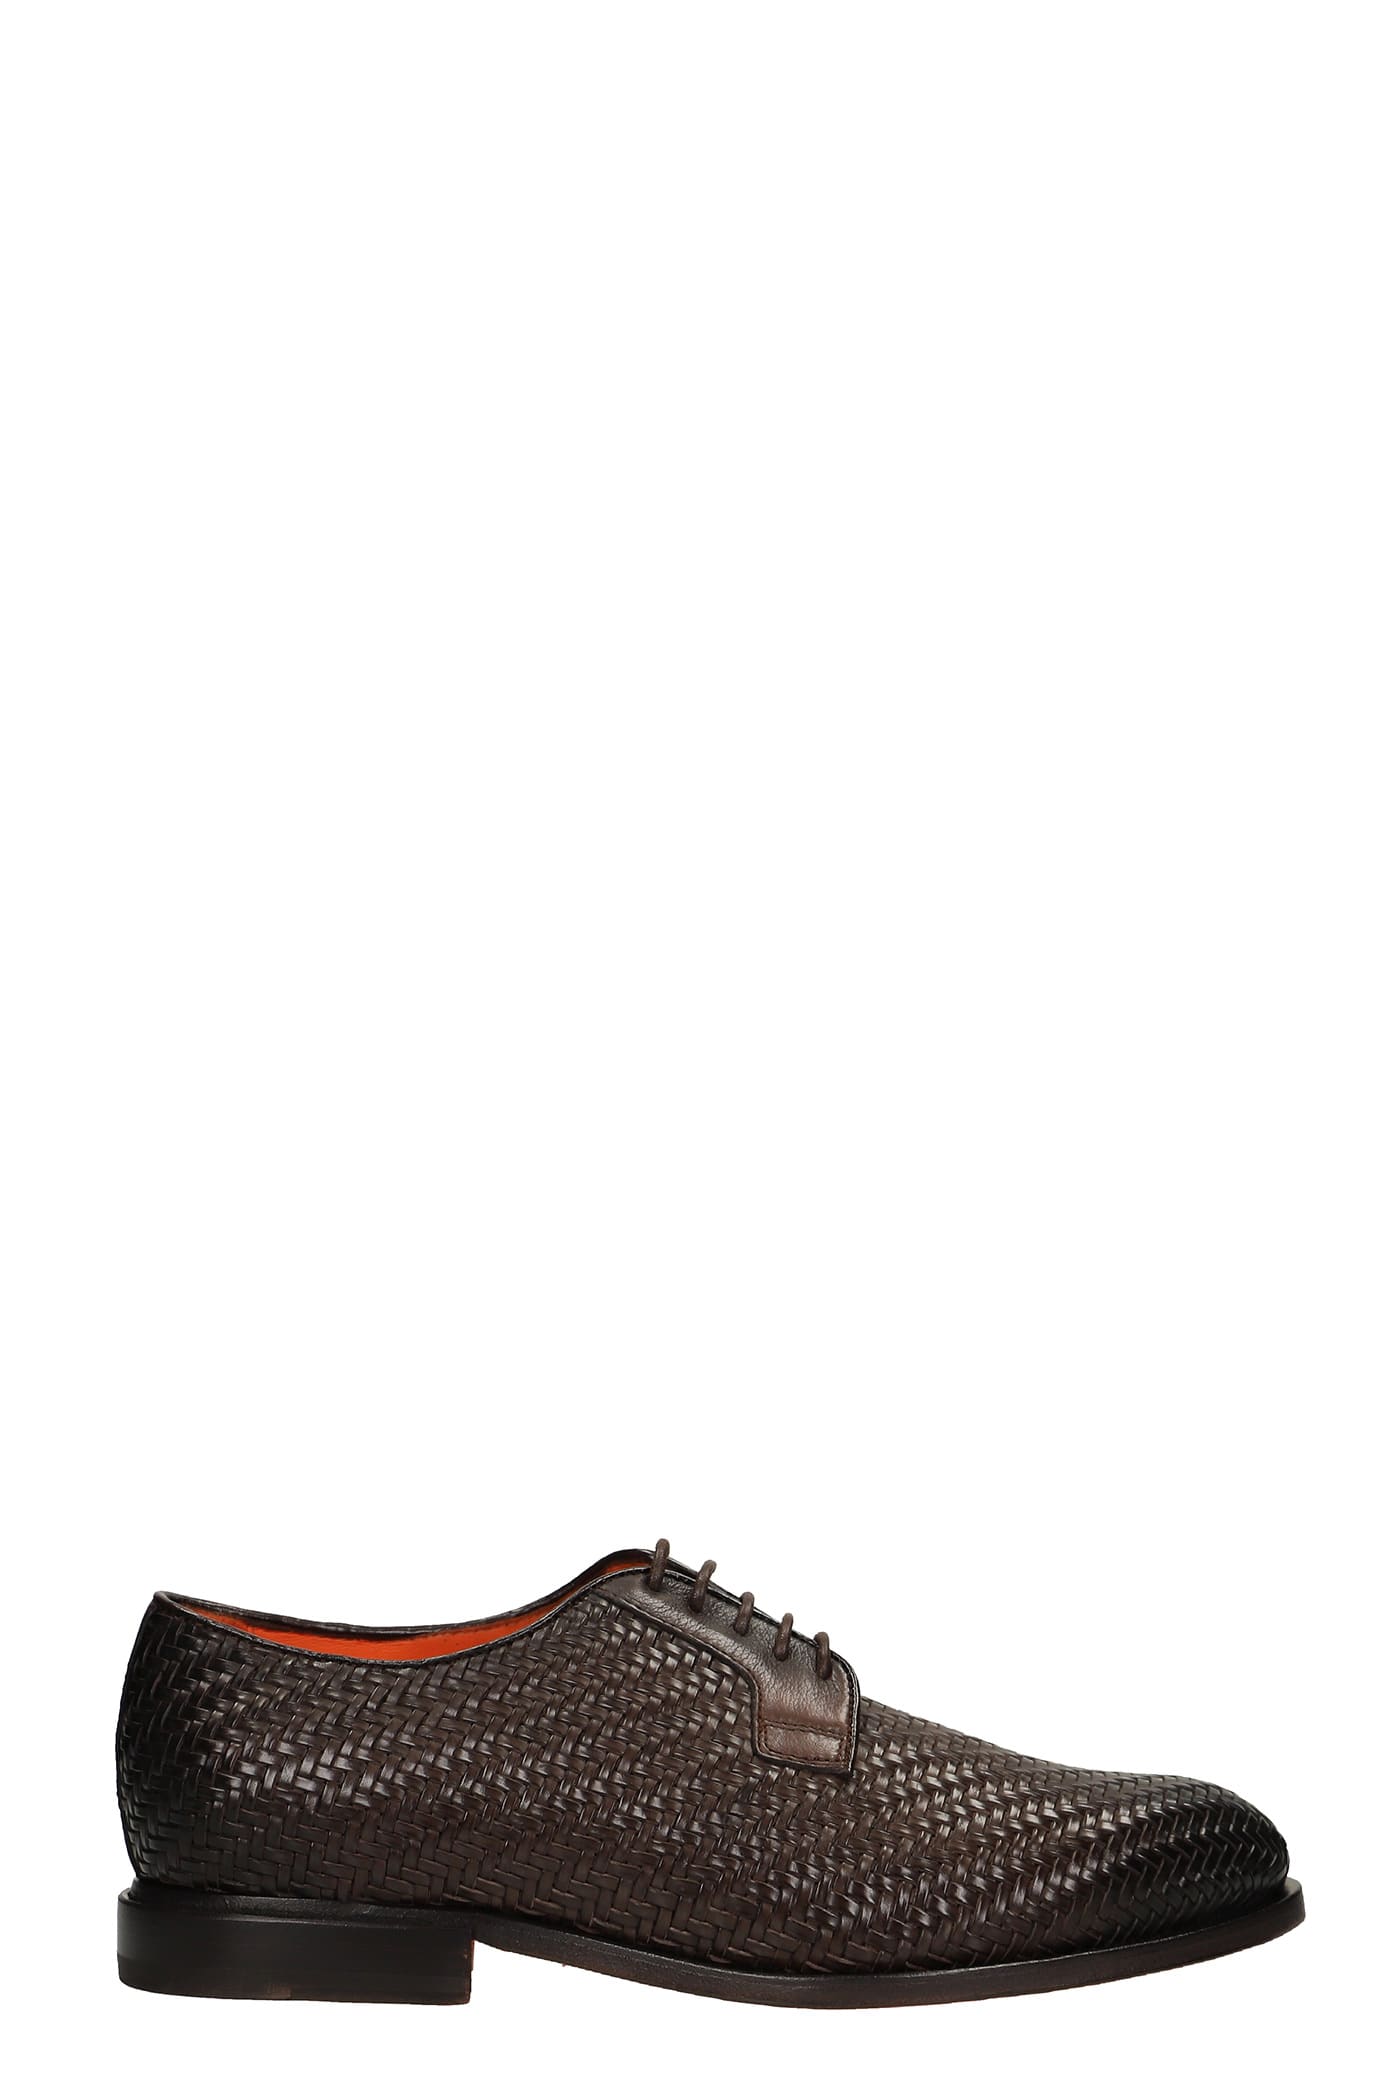 Santoni Lace Up Shoes In Brown Leather